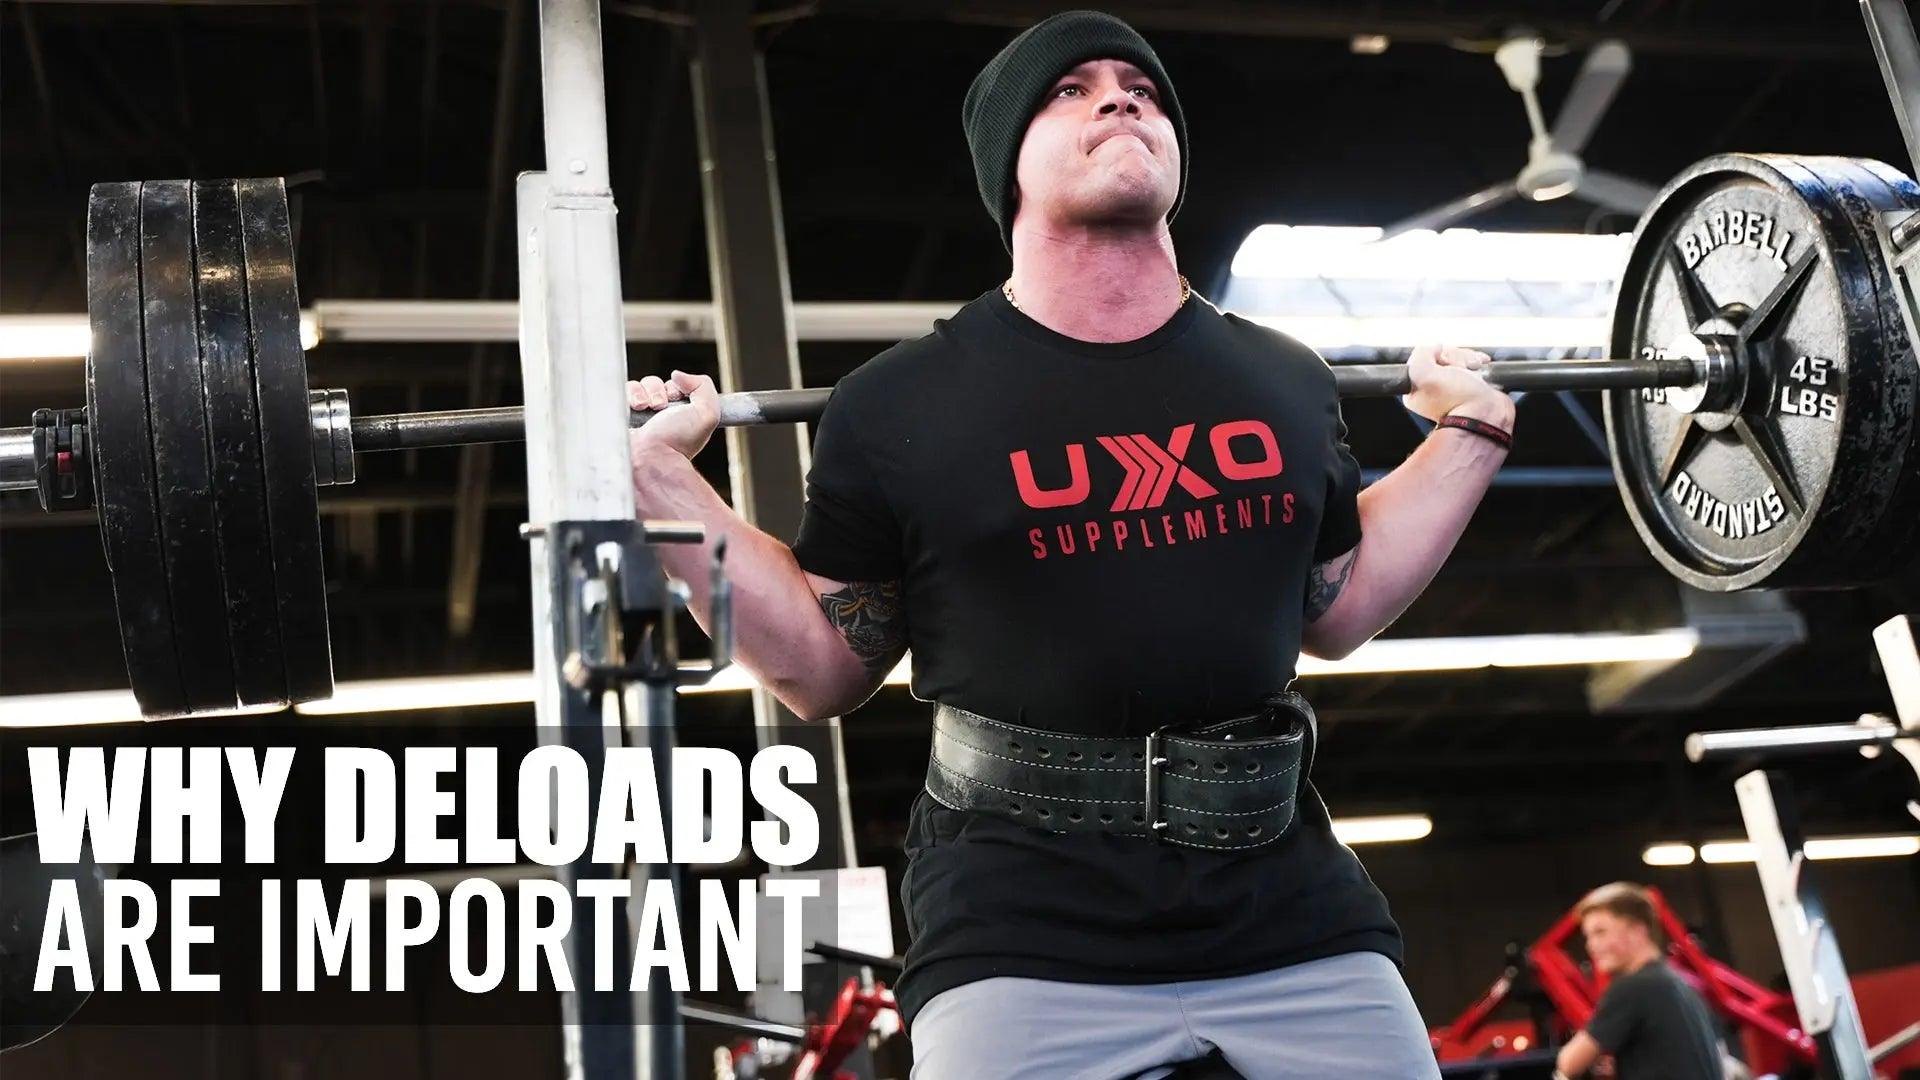 Why deloads are important - UXO Supplements